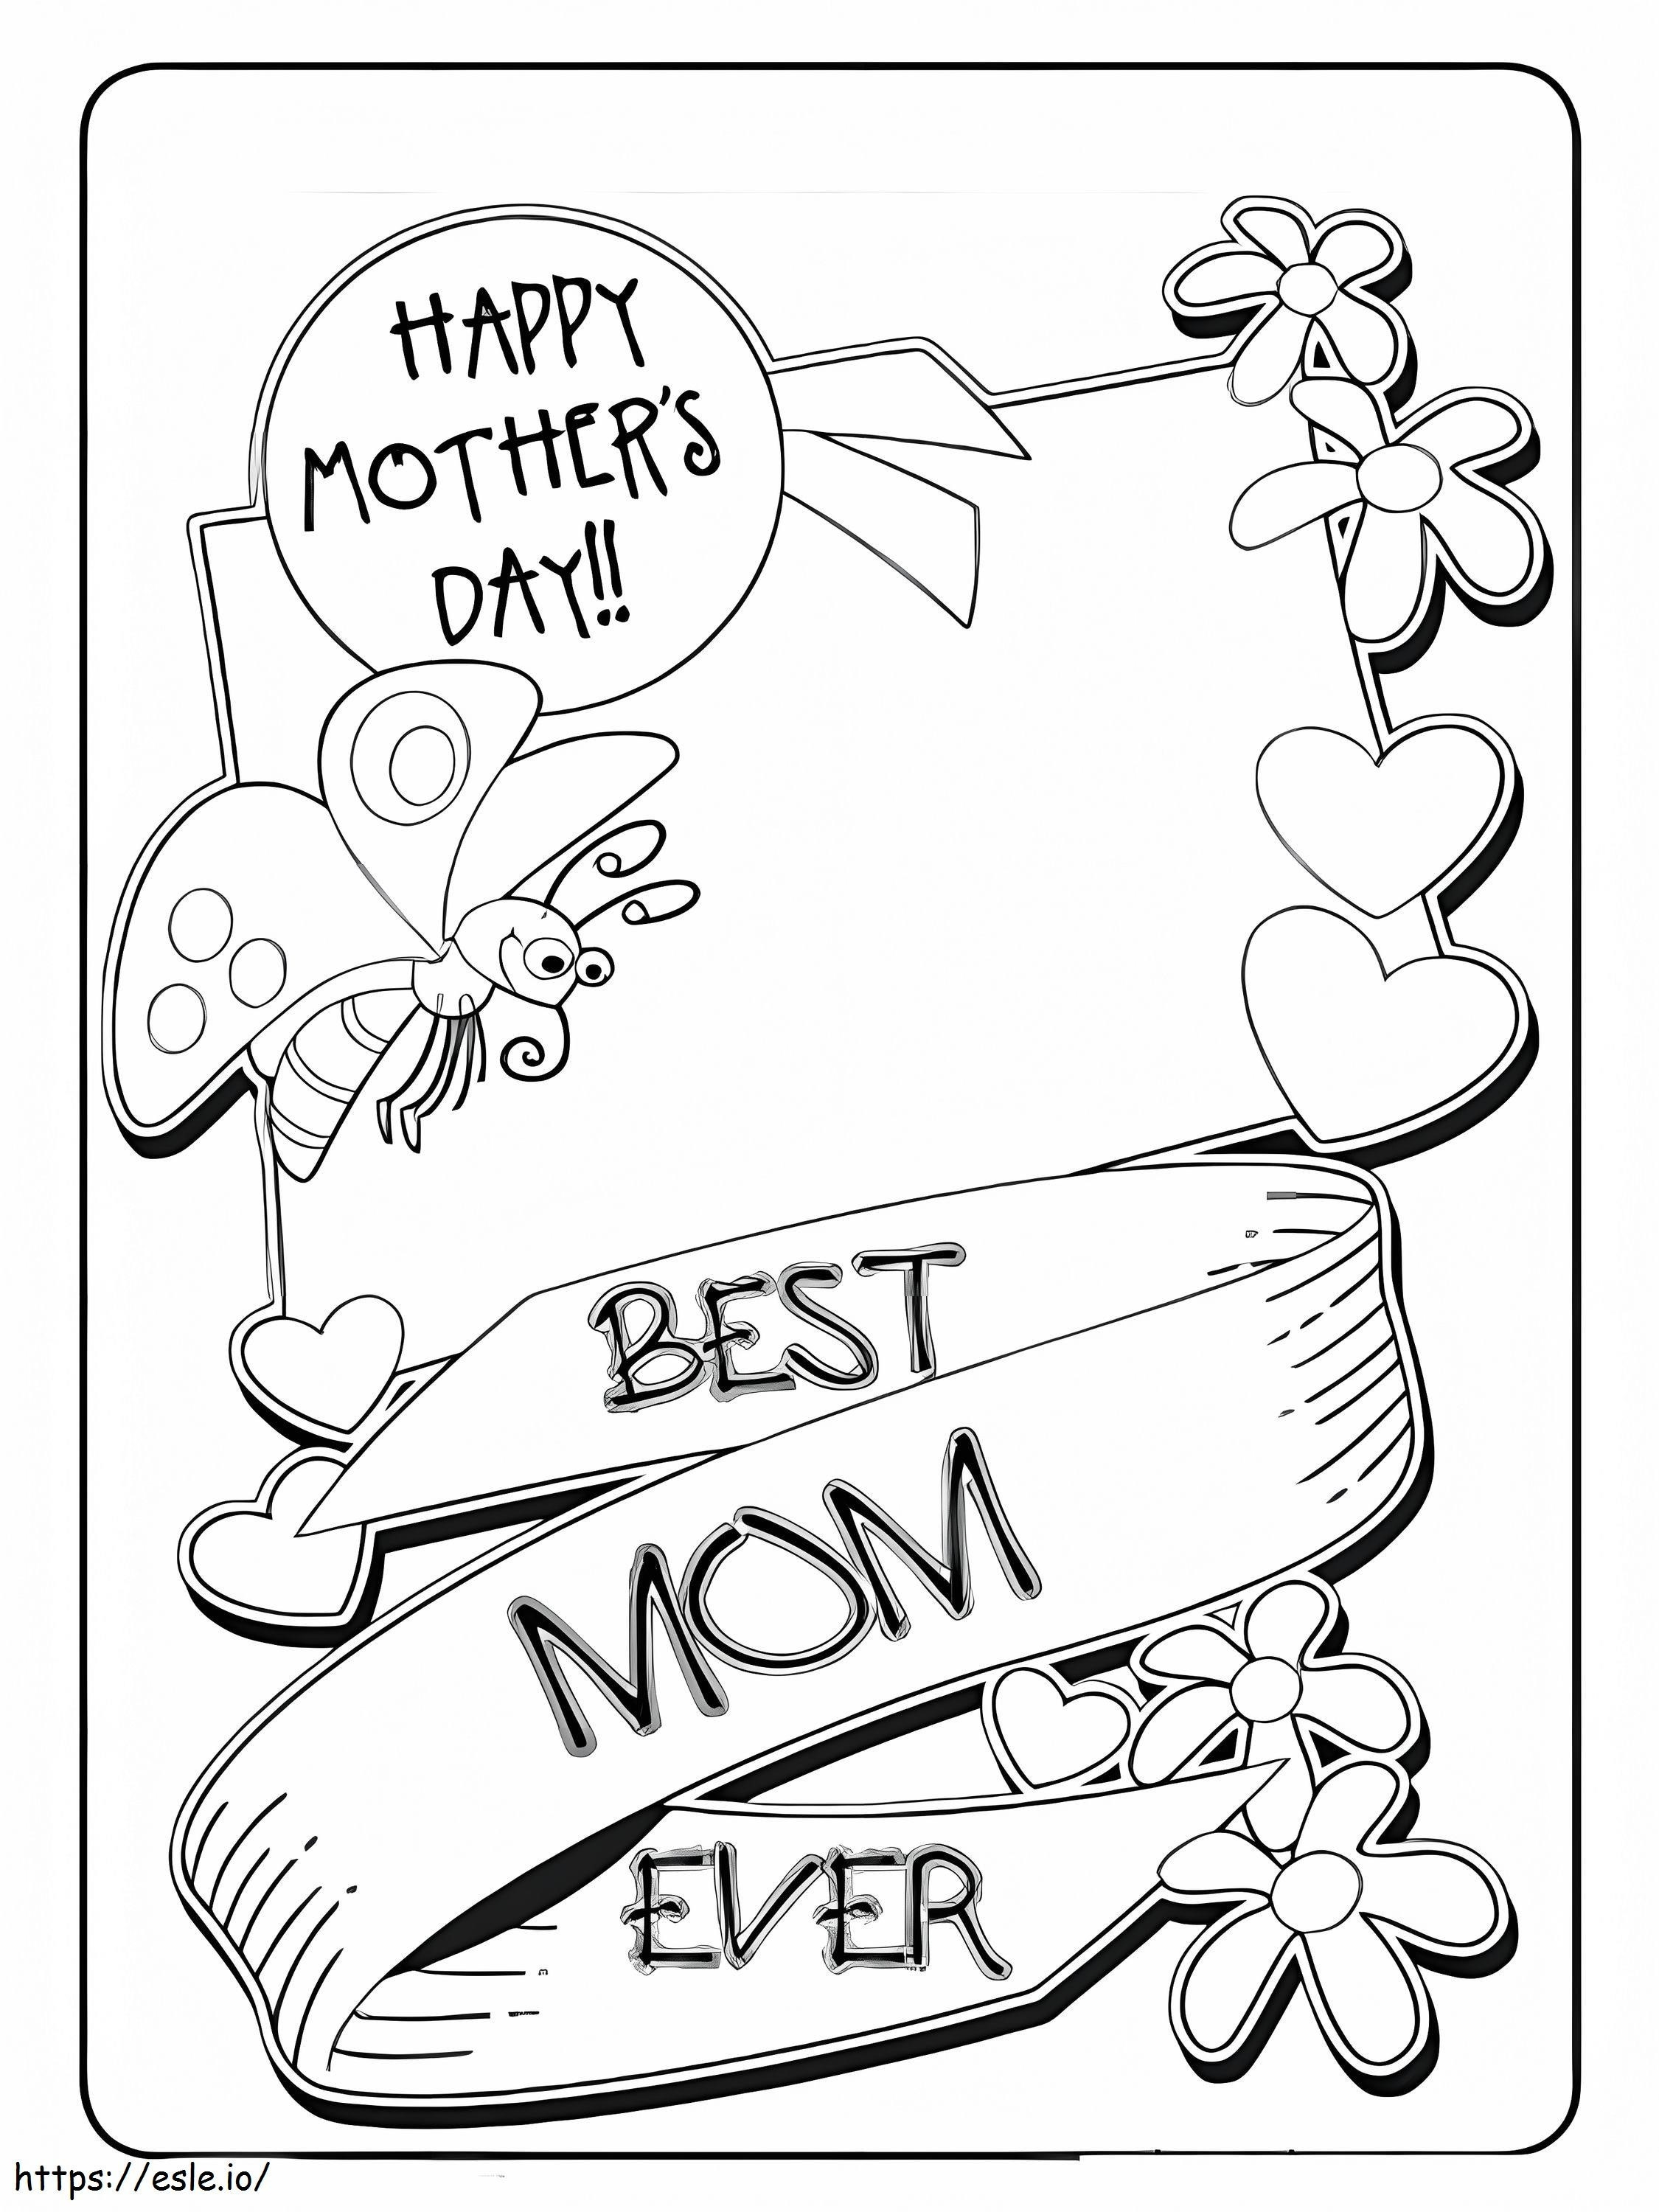 Best Mom Ever coloring page